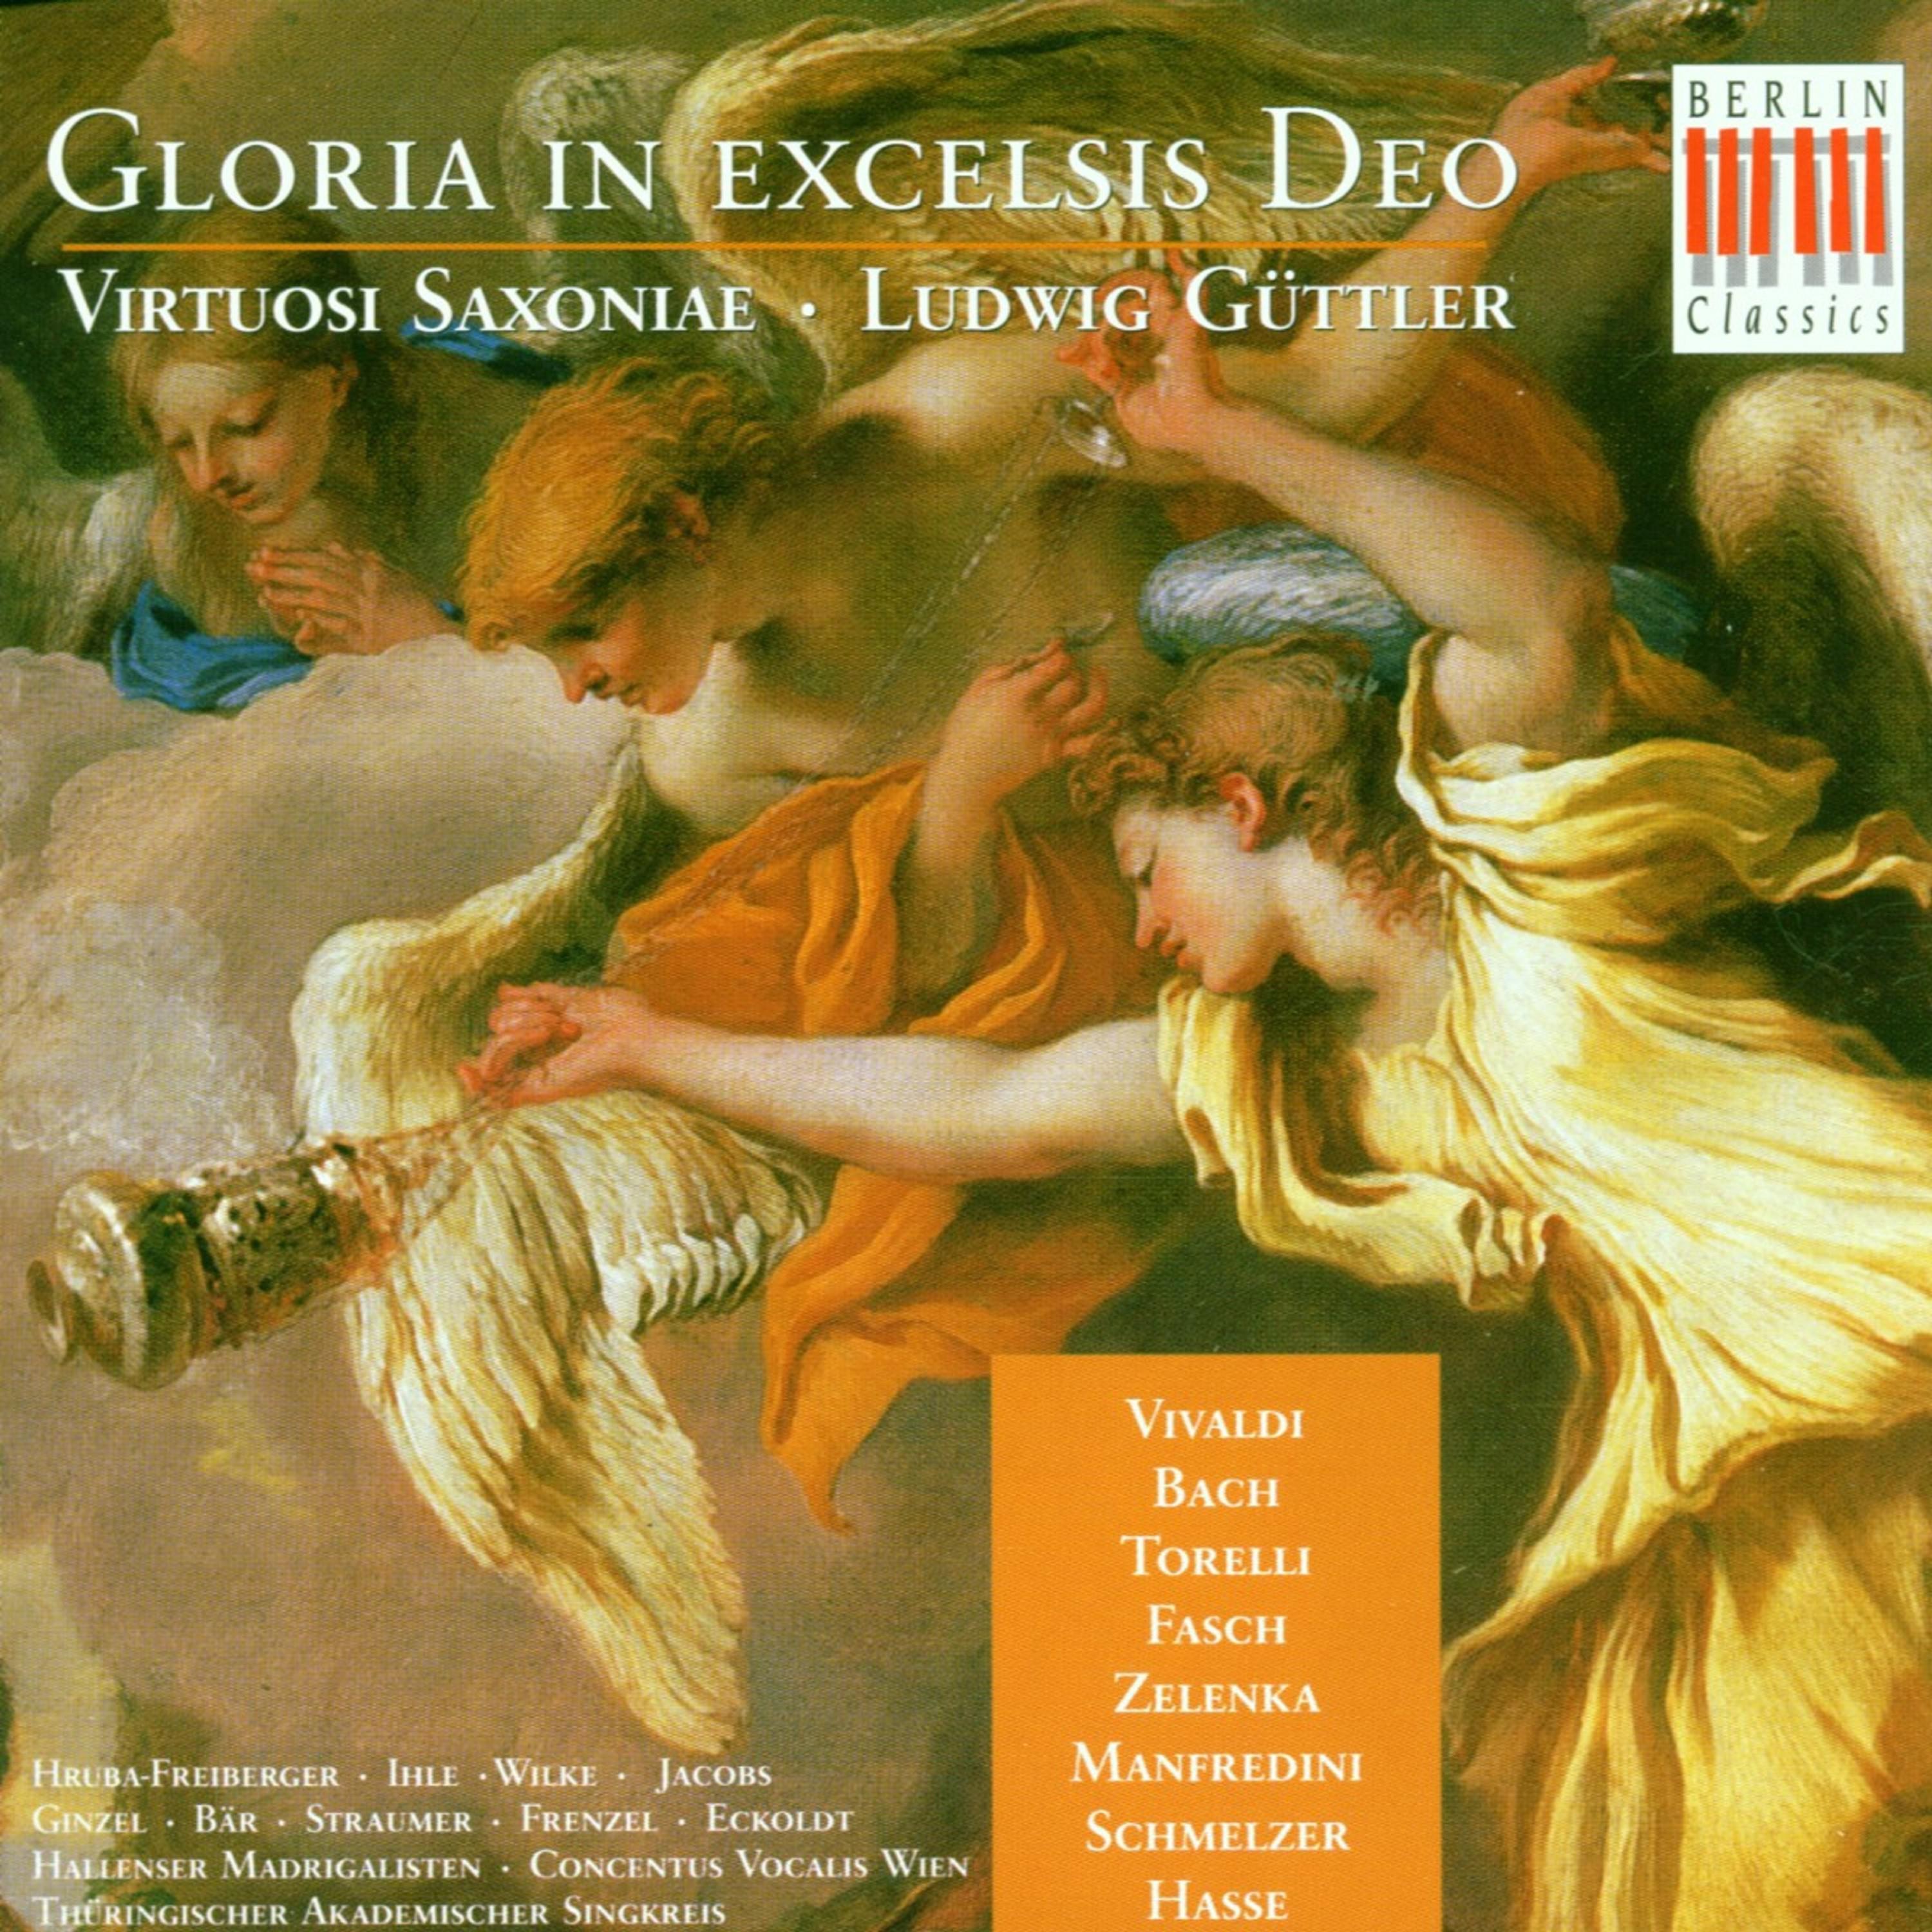 No. 1, Gloria in excelsis Deo